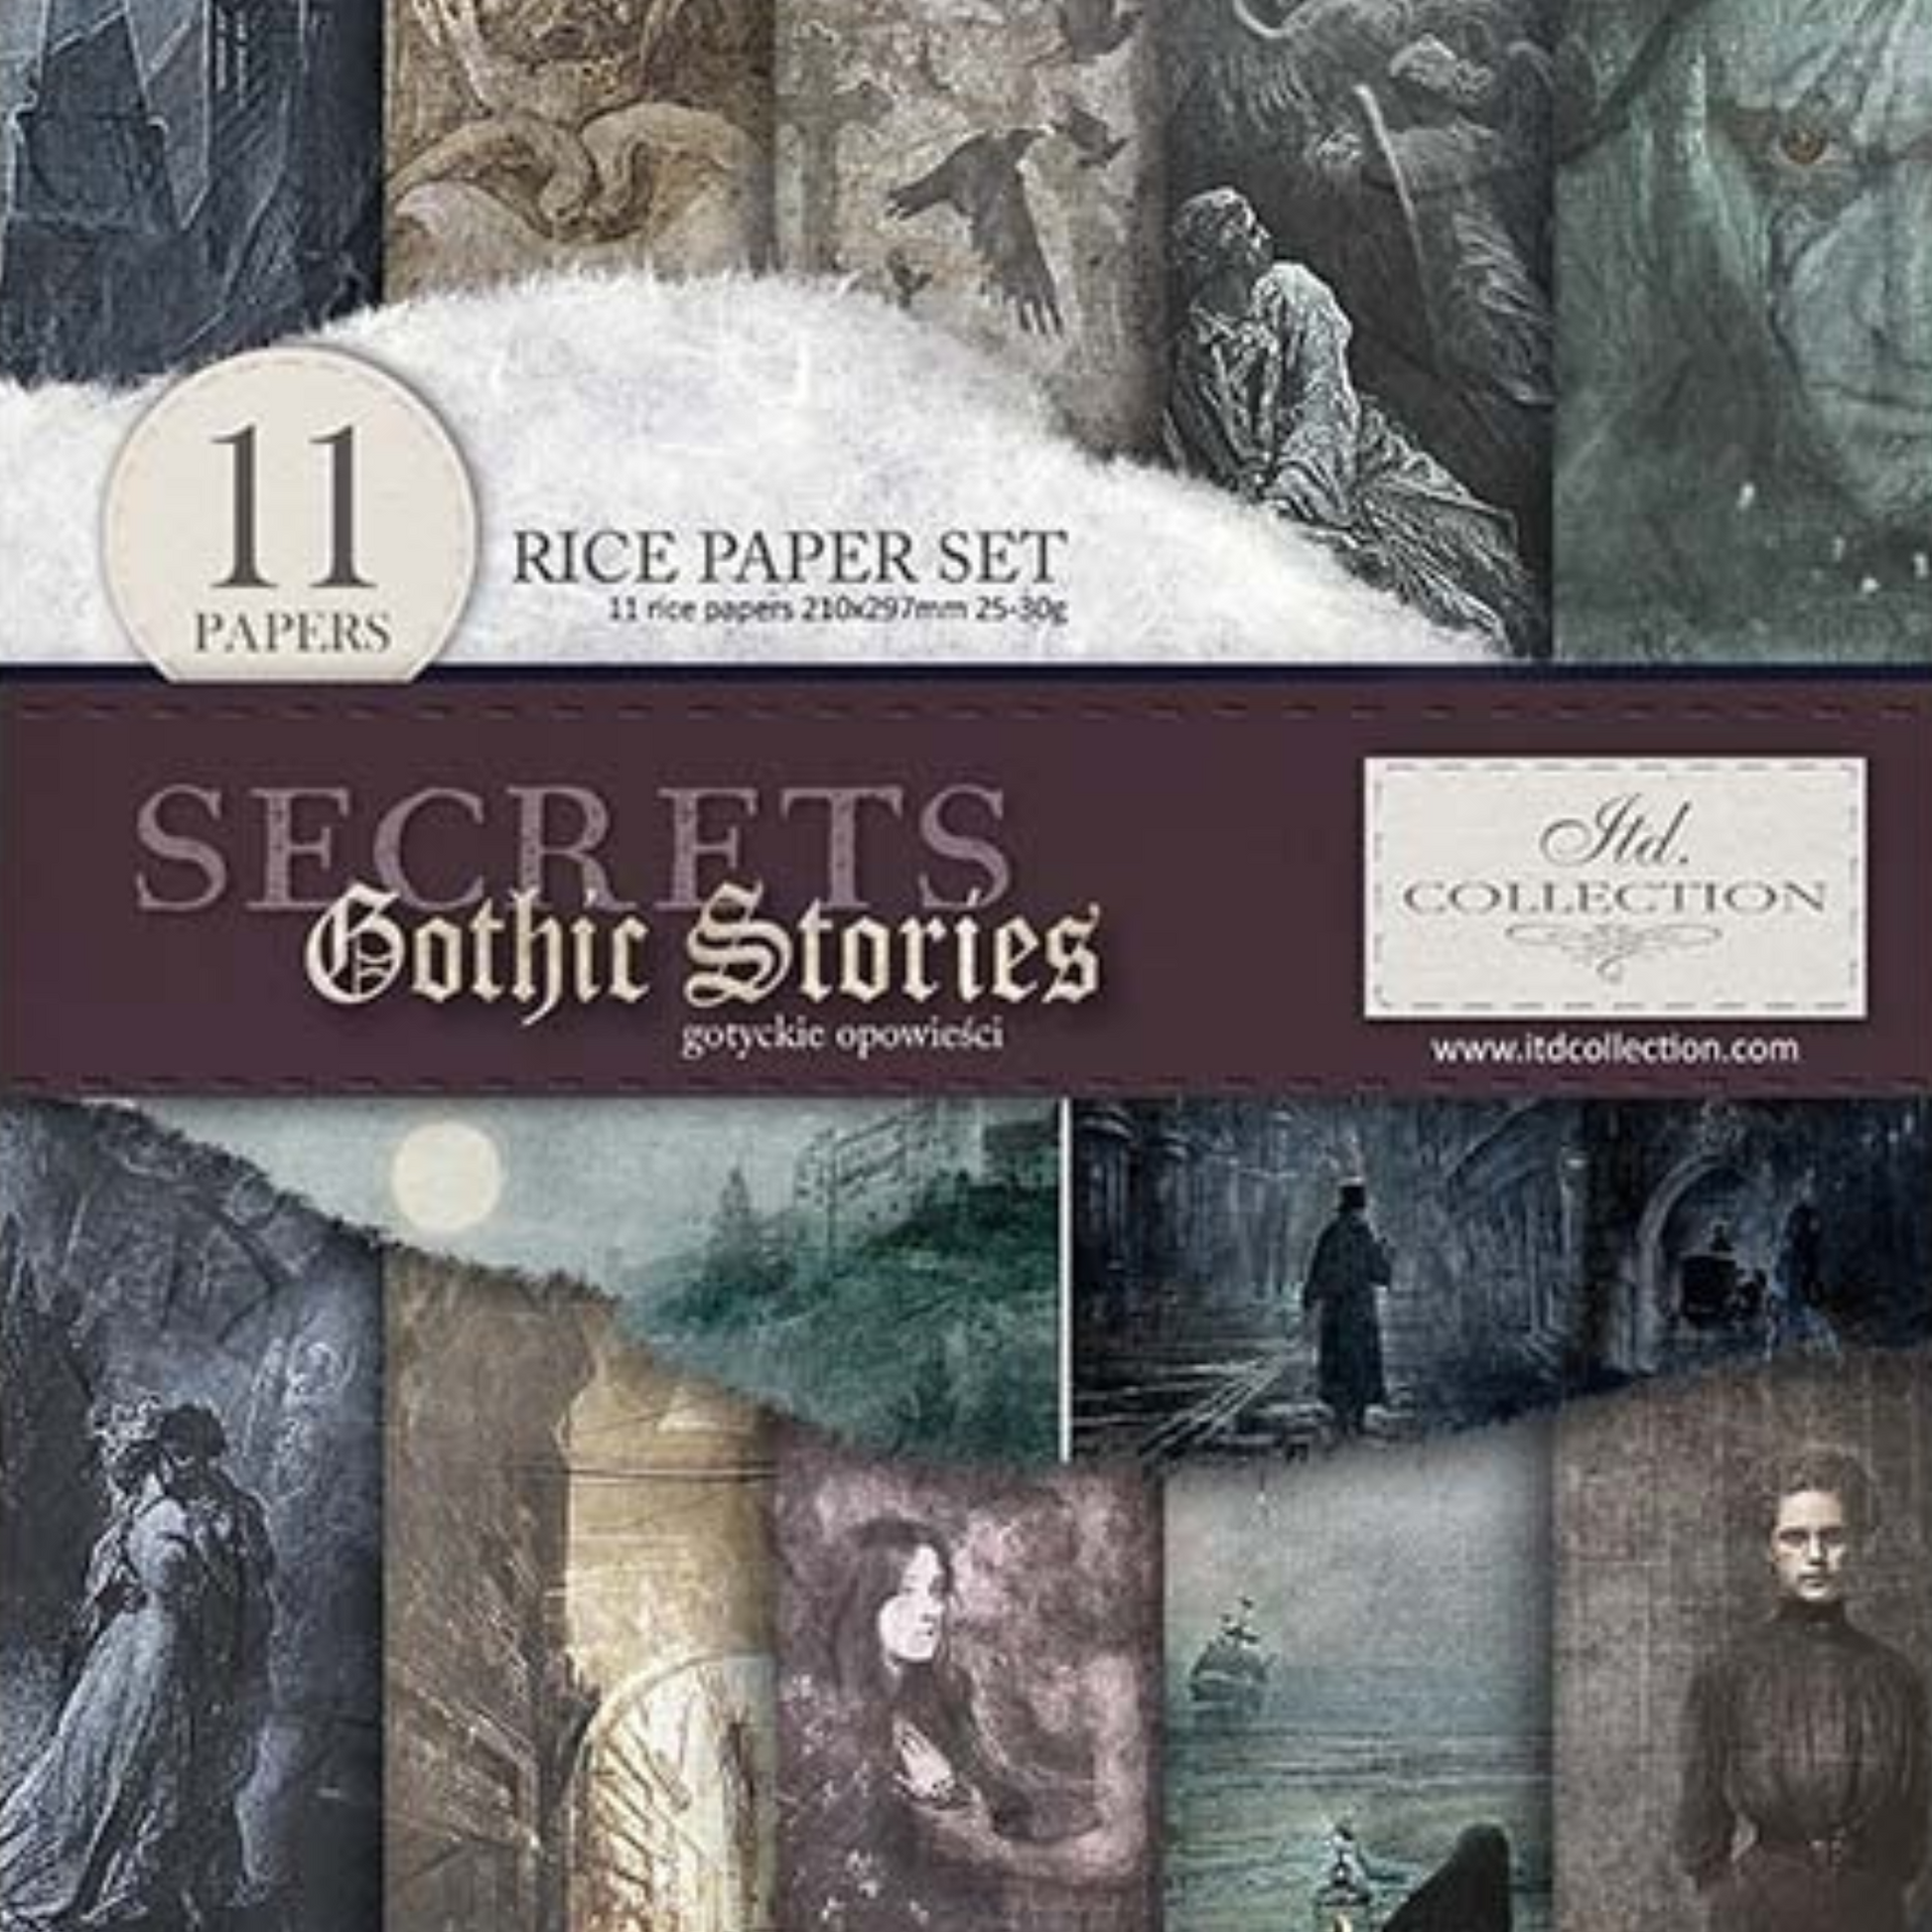 "Gothic Stories" decoupage rice paper set of 11 size A4 sheets-front coverr- by ITD Collection available at Milton's Daughter